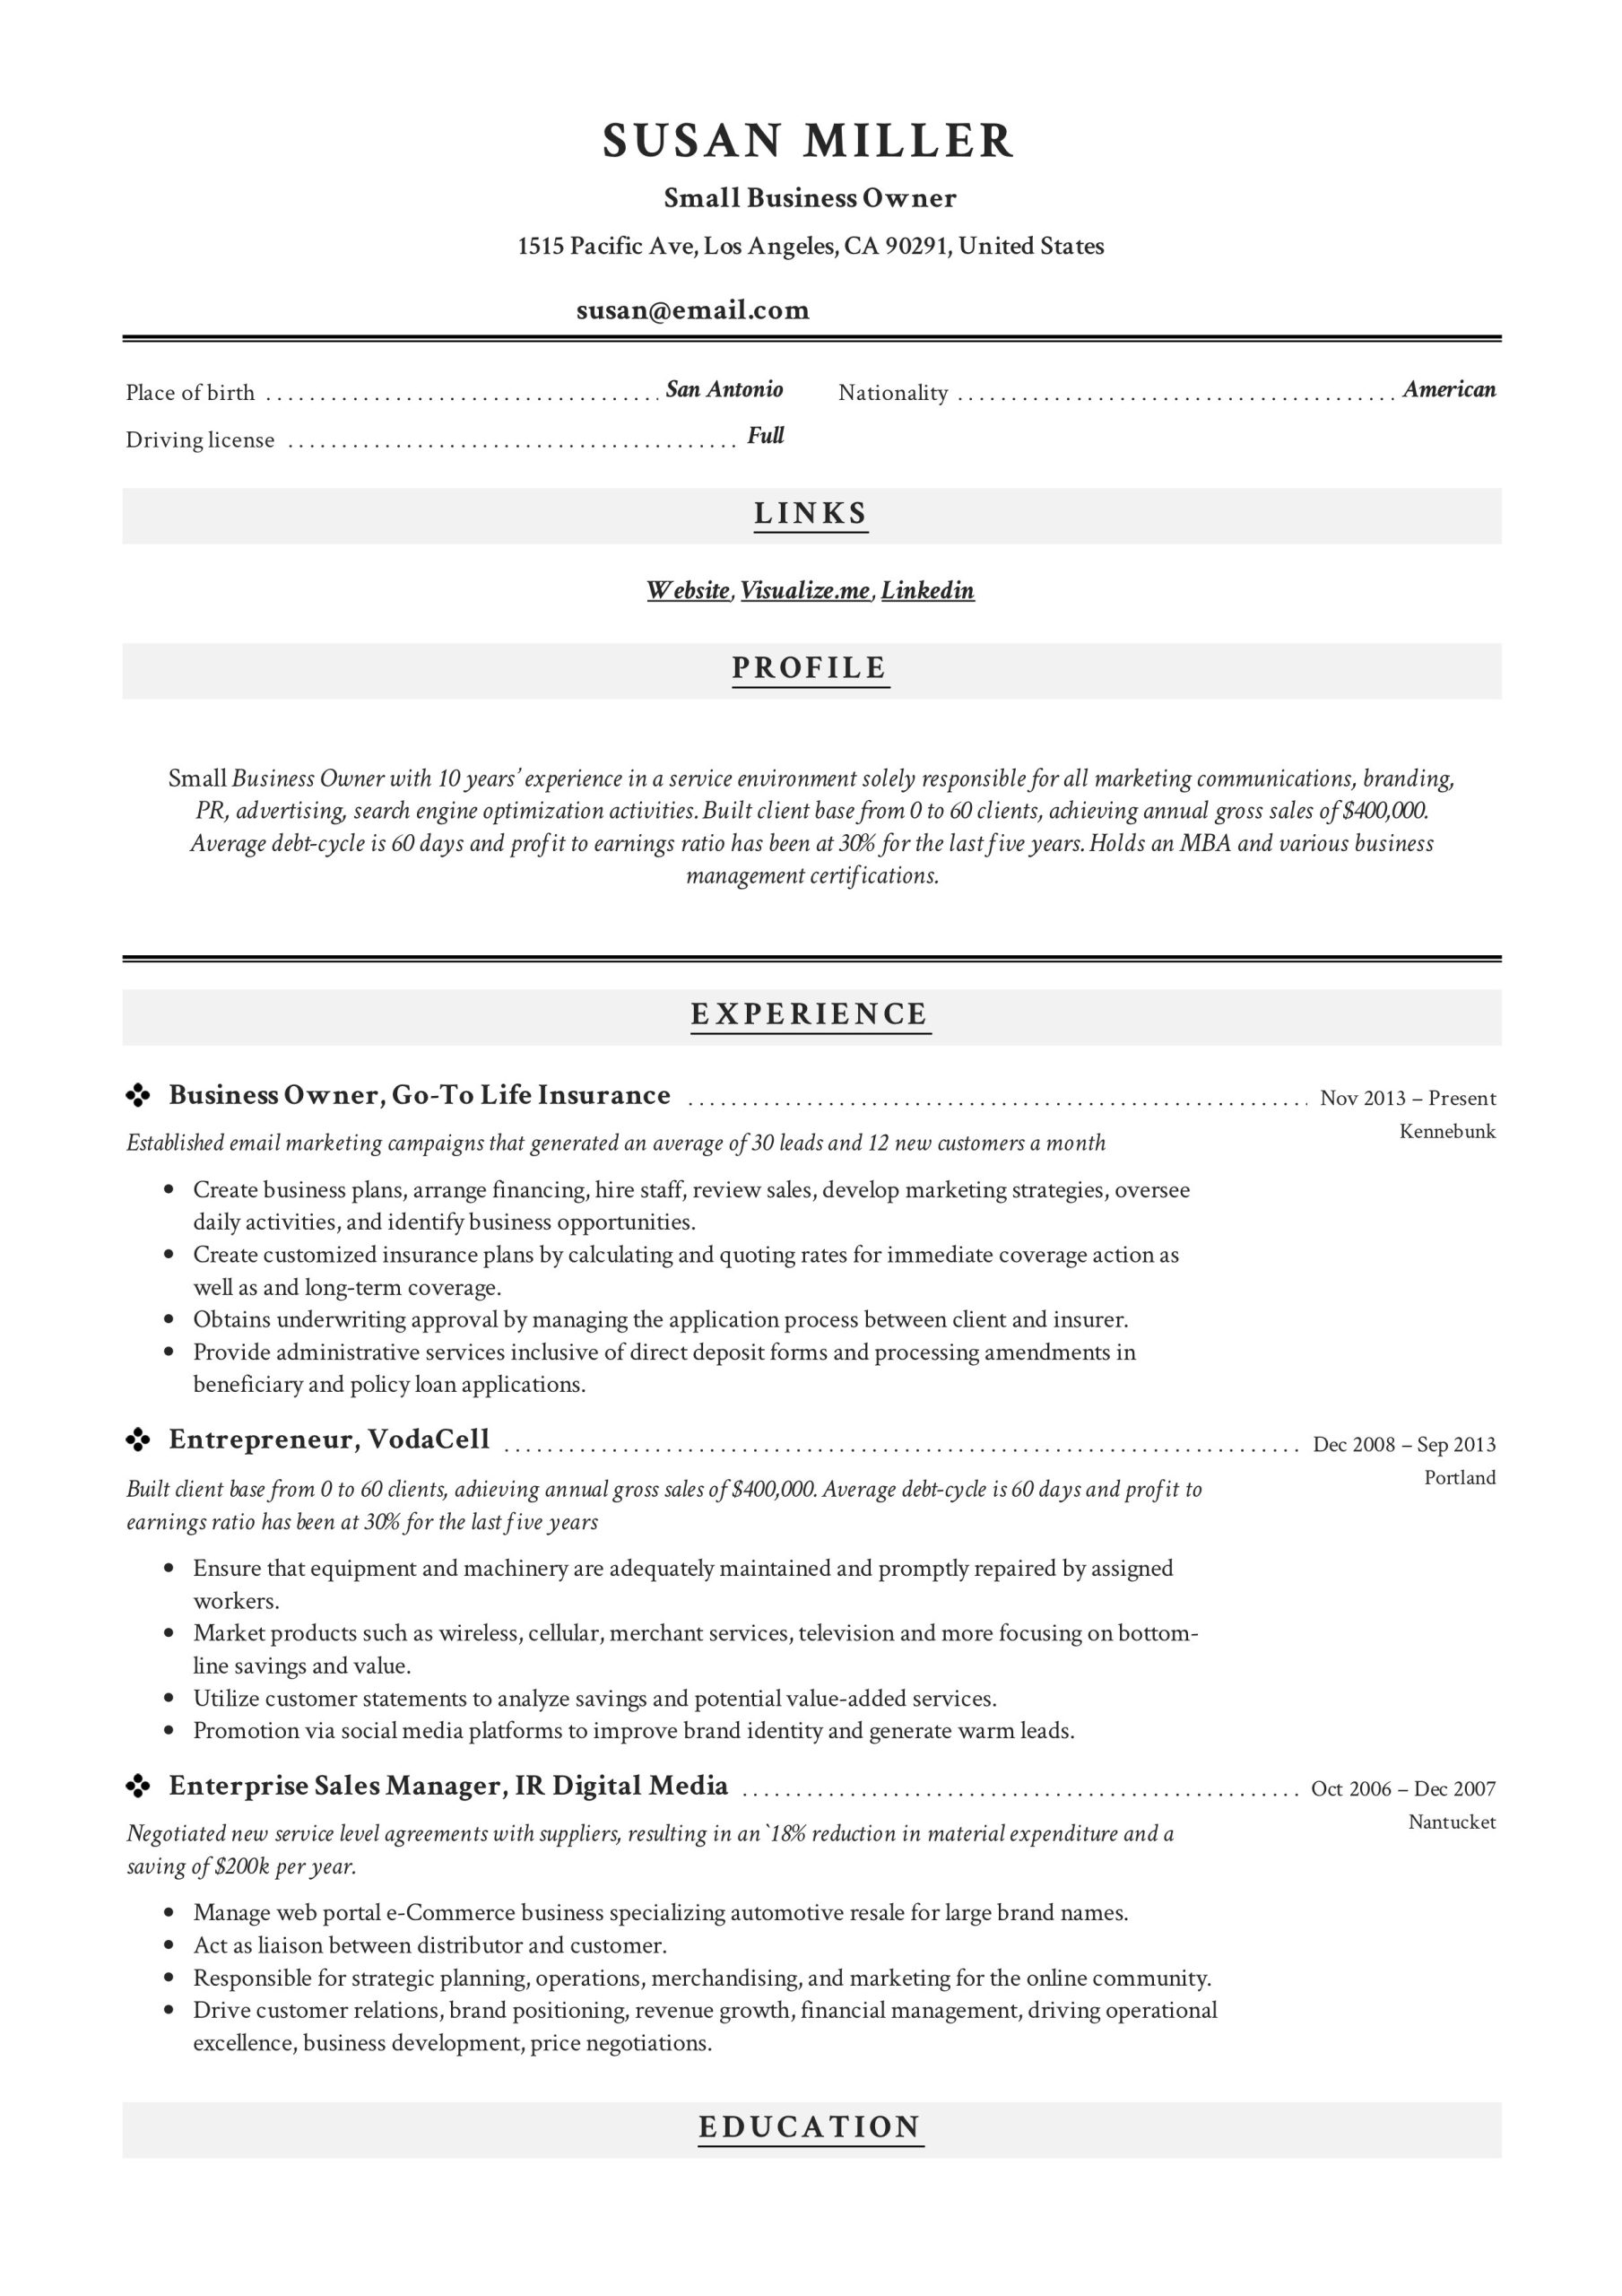 Sample Resume Of Self Employed Person Small Business Owner Resume Guide  19 Examples Pdf 2020